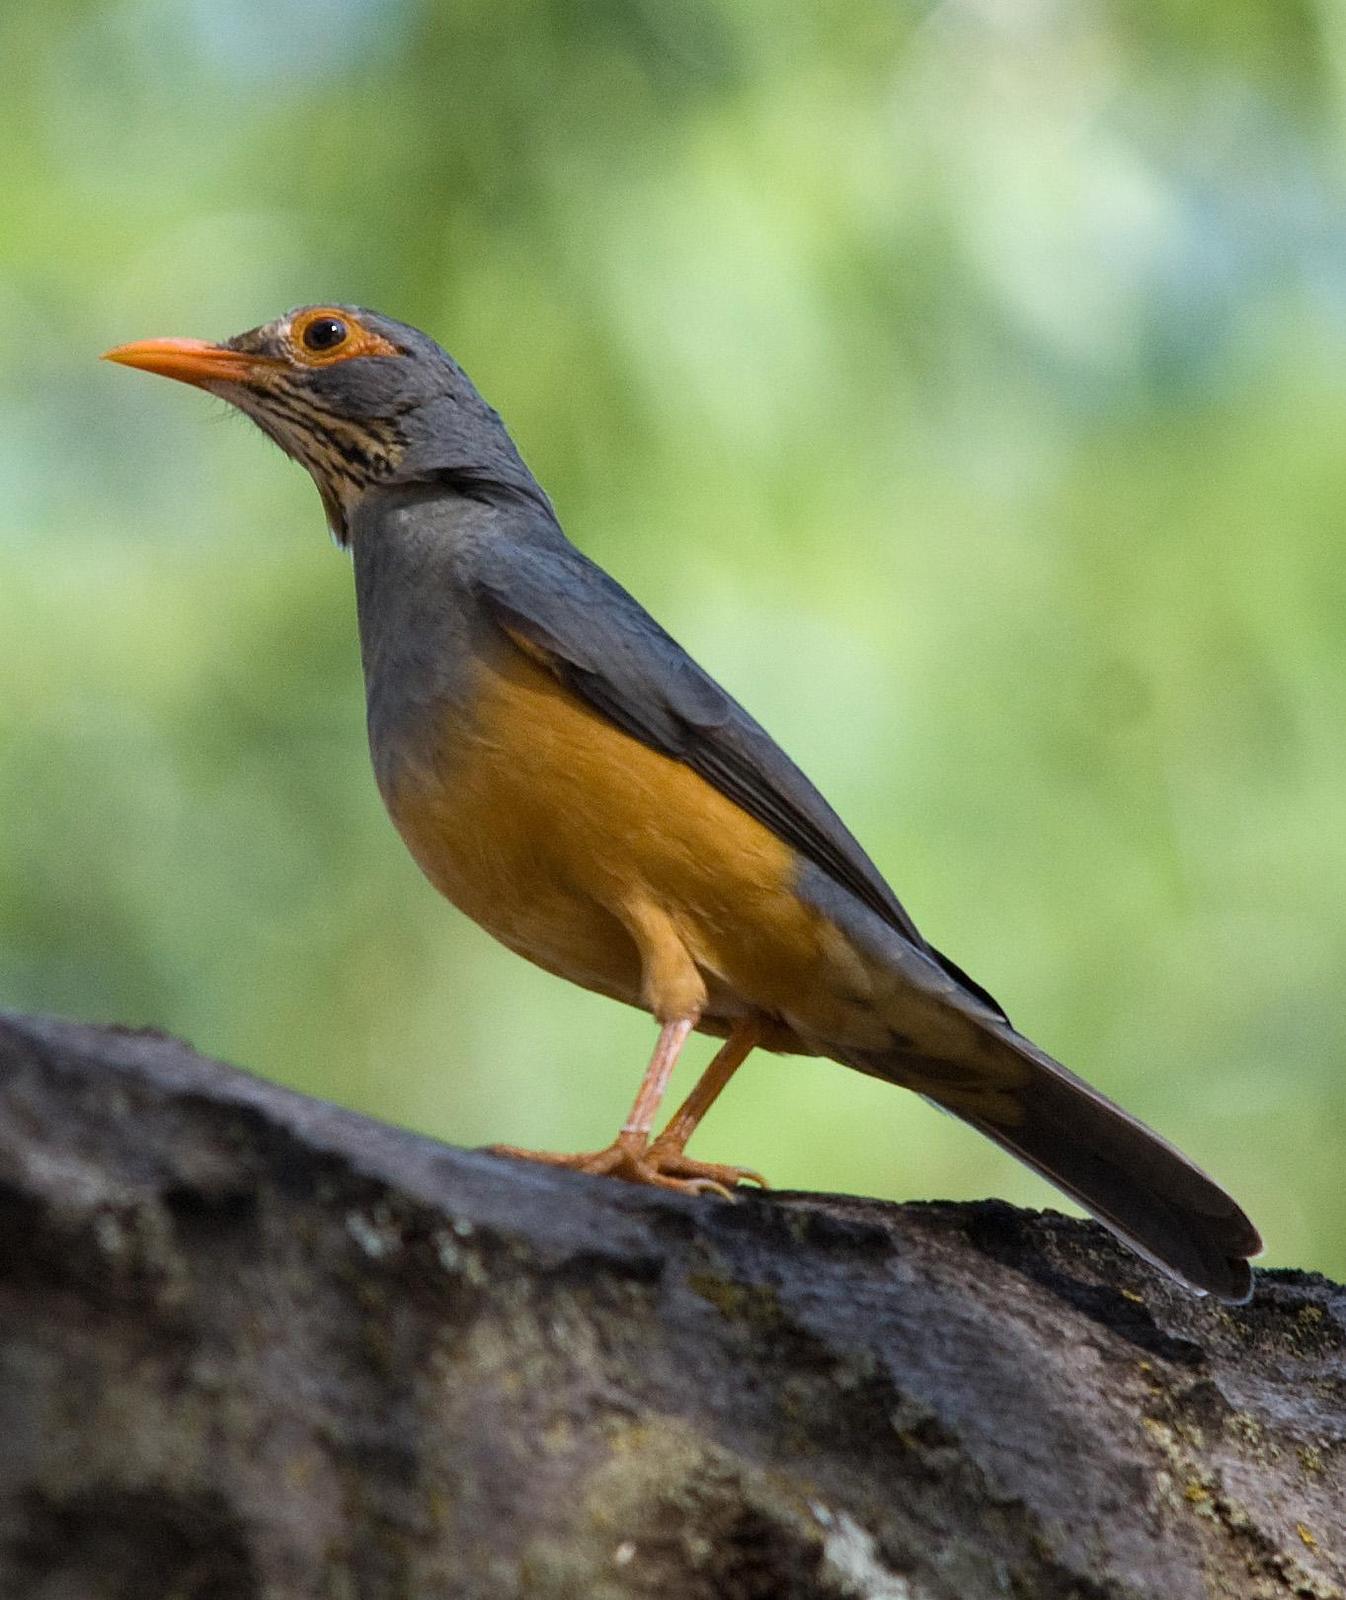 African Bare-eyed Thrush Photo by Carol Foil